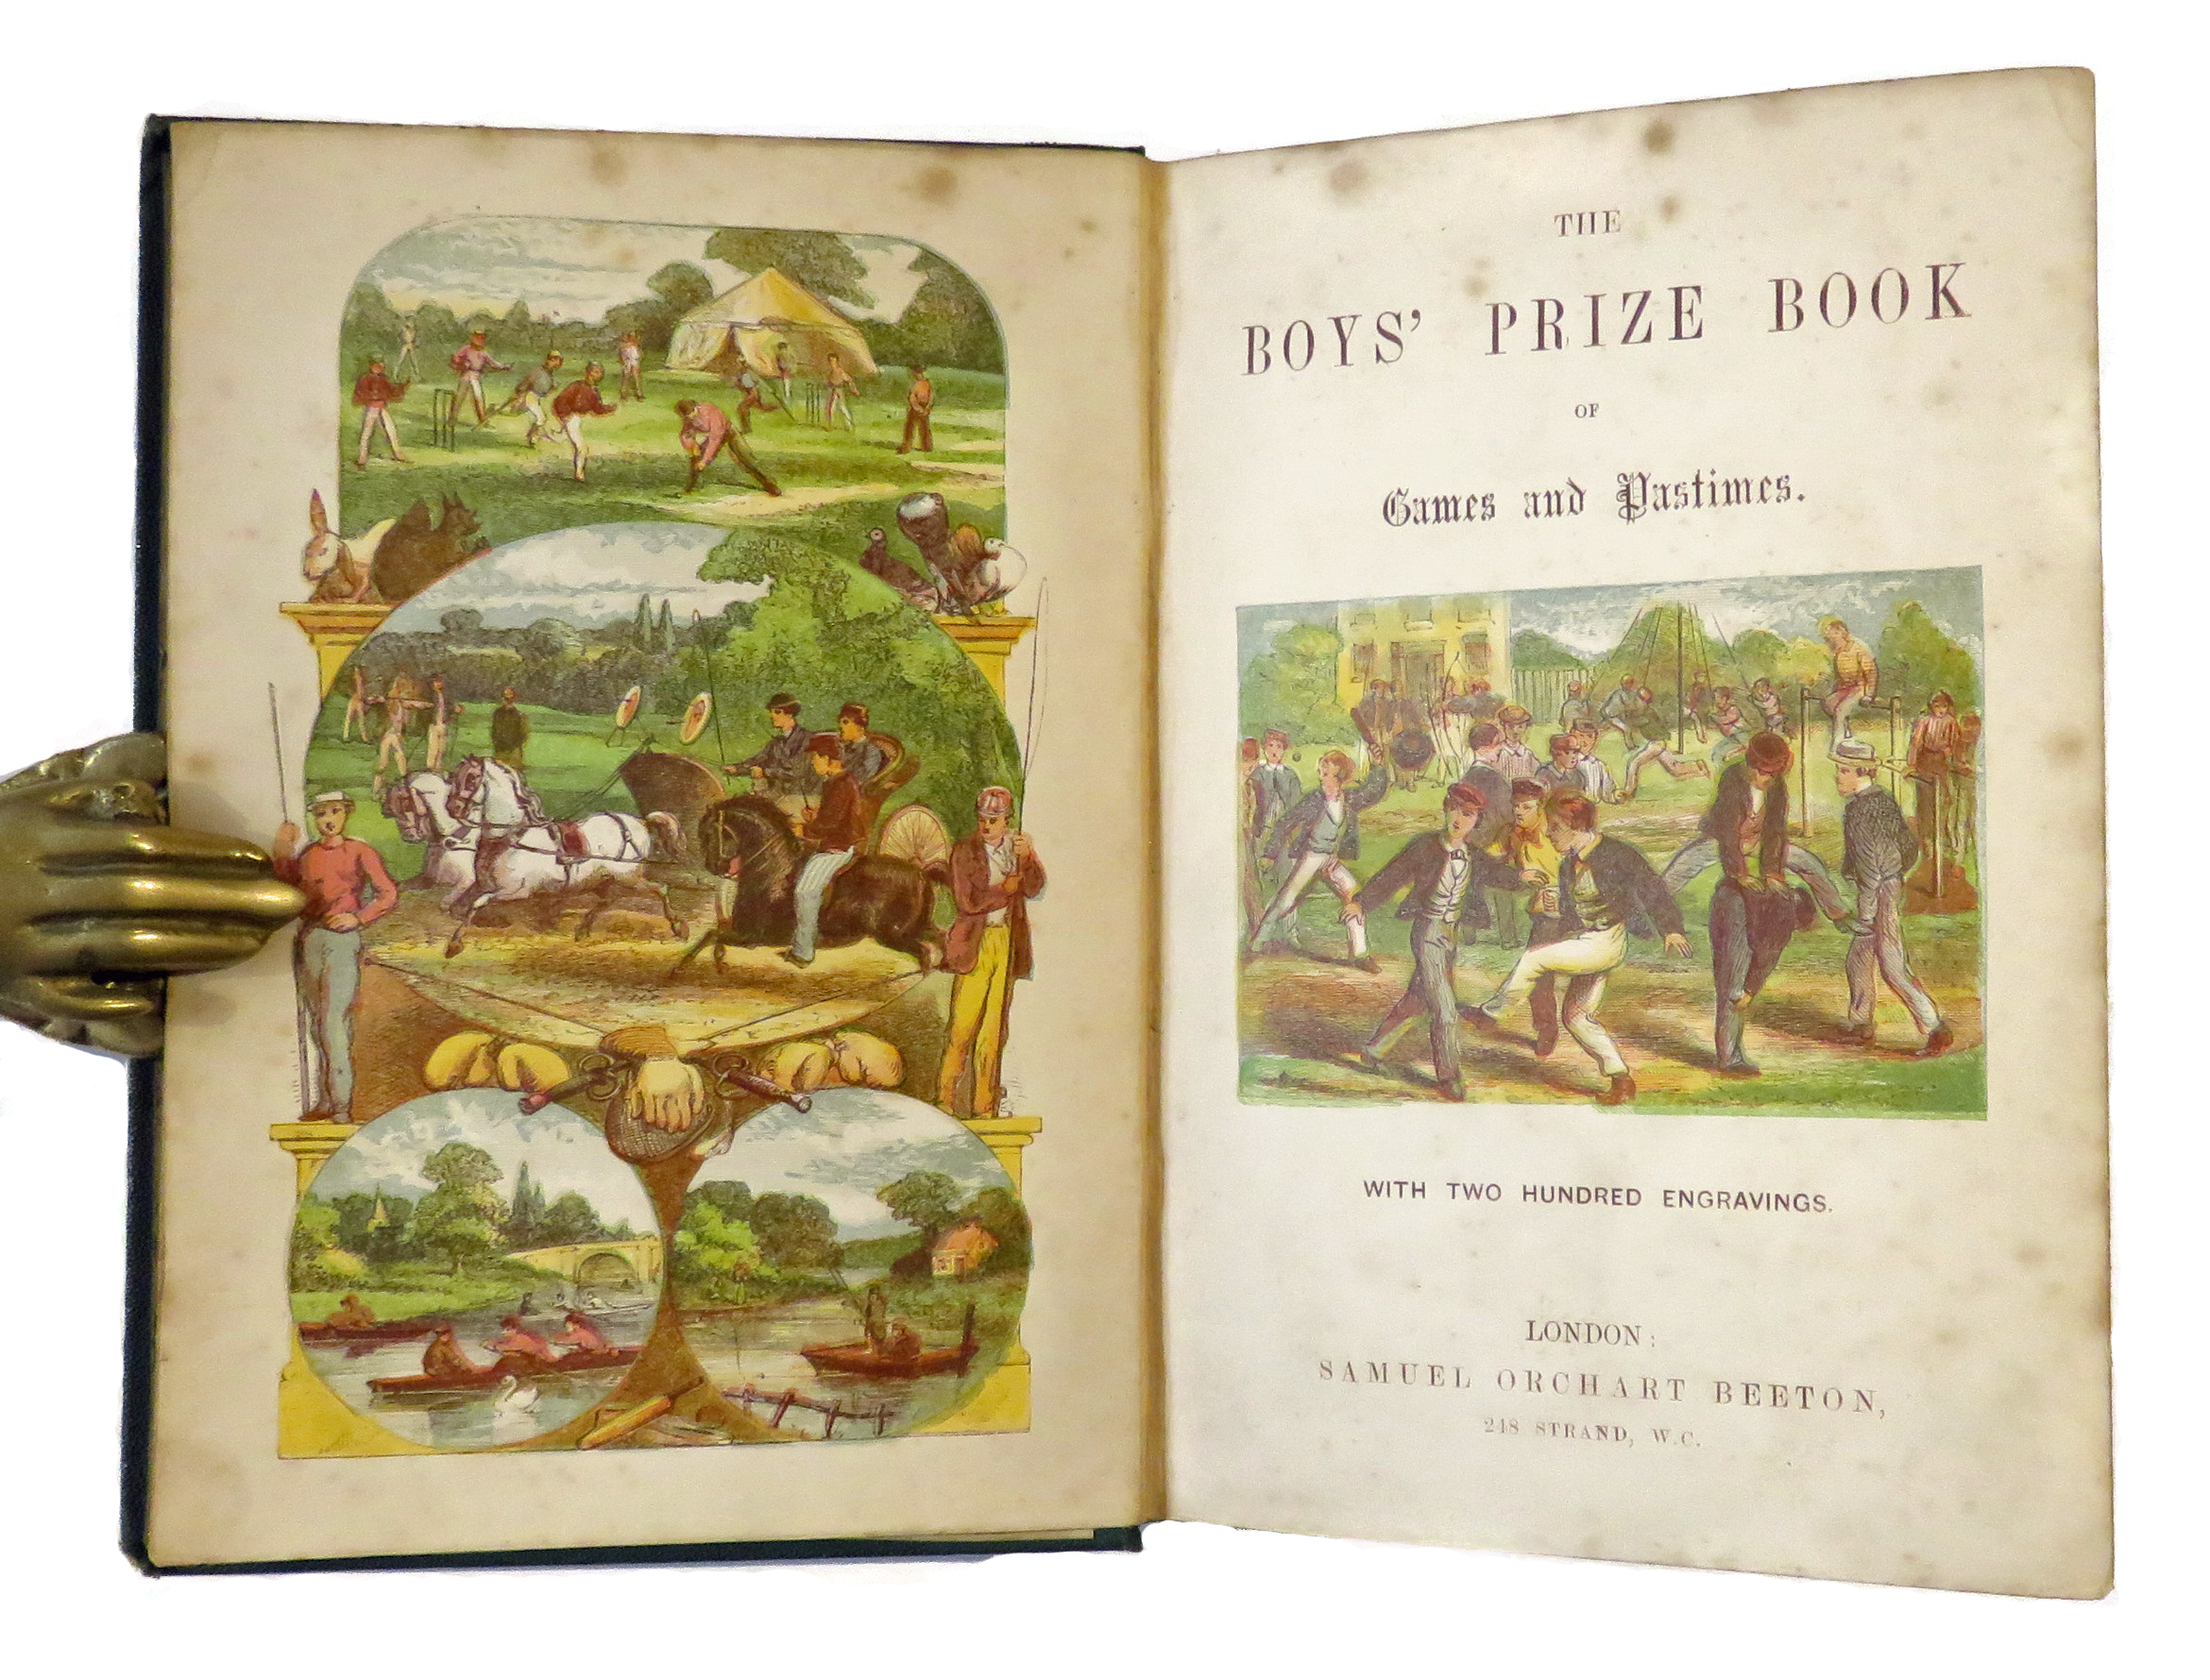 The Boy's Prize Book of Games and Pastimes; or, Sports, Games, Exercises, and Pursuits.